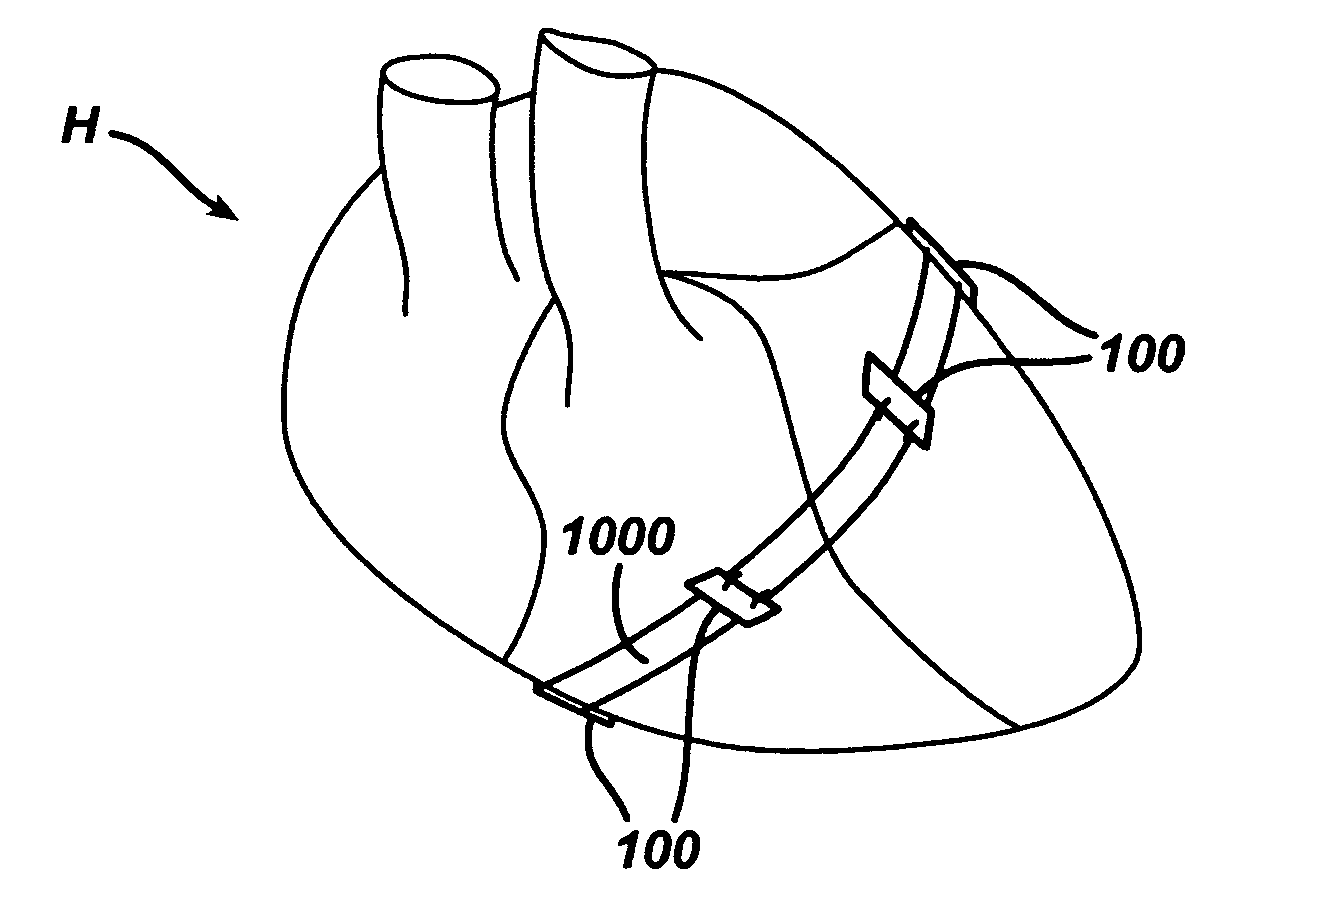 Systems and methods for assisting cardiac valve coaptation